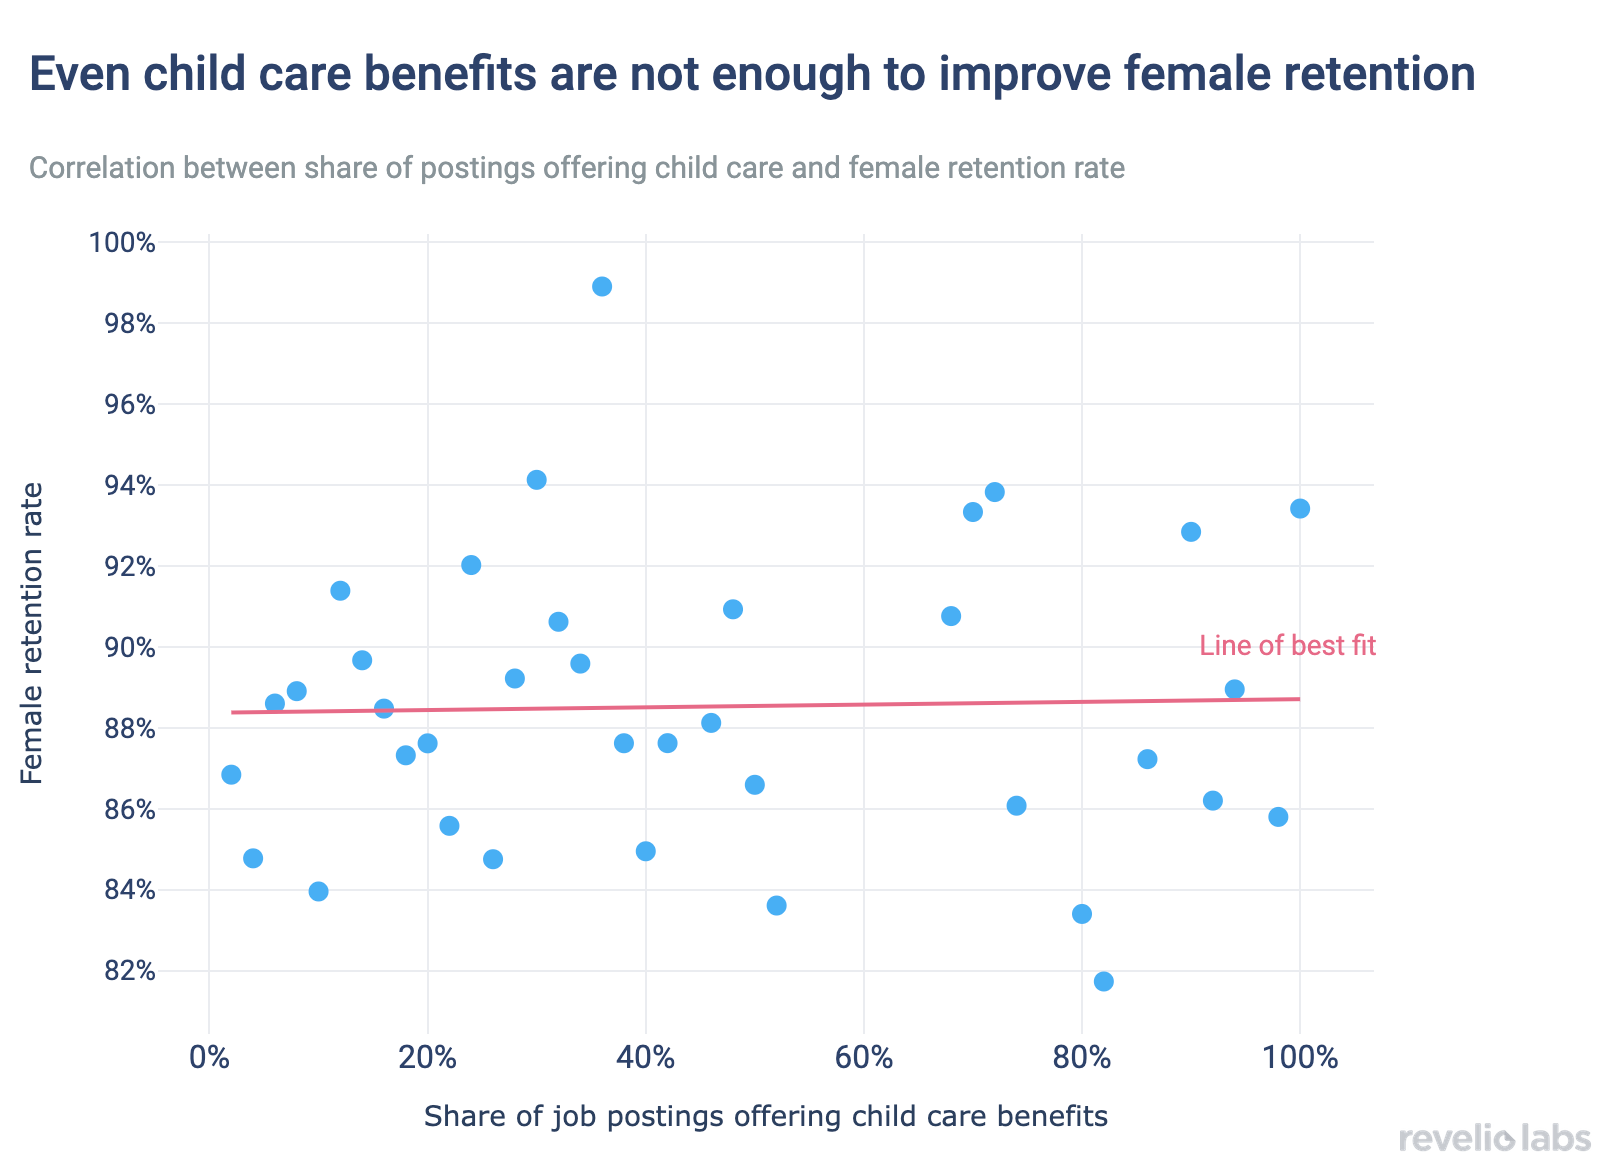 Even child care benefits are not enough to improve female retention